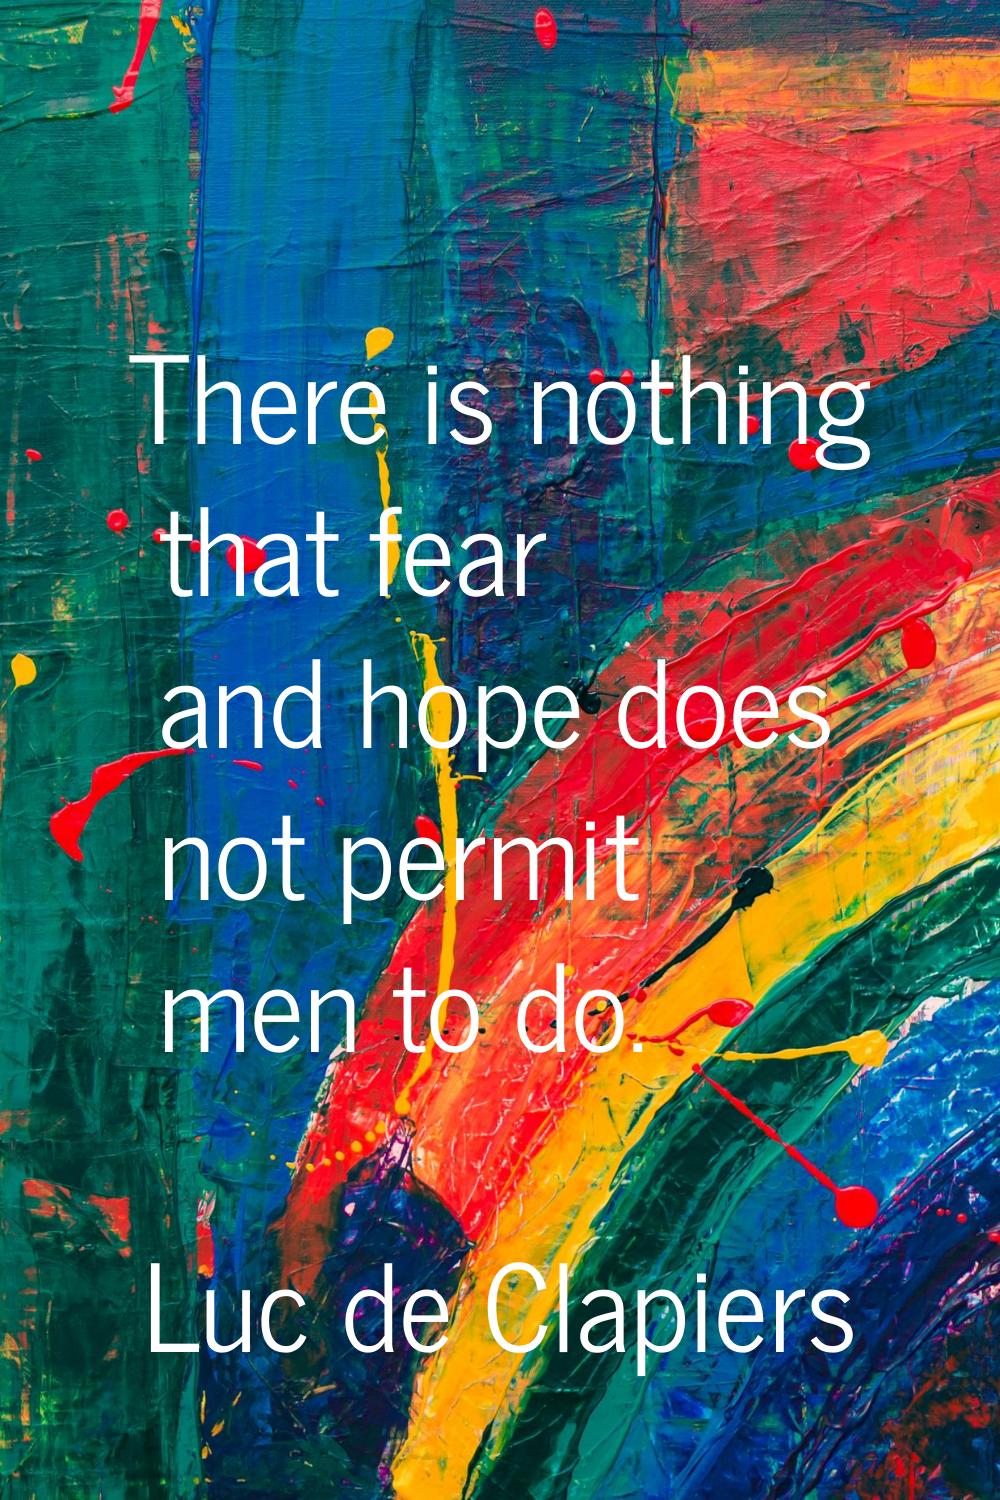 There is nothing that fear and hope does not permit men to do.